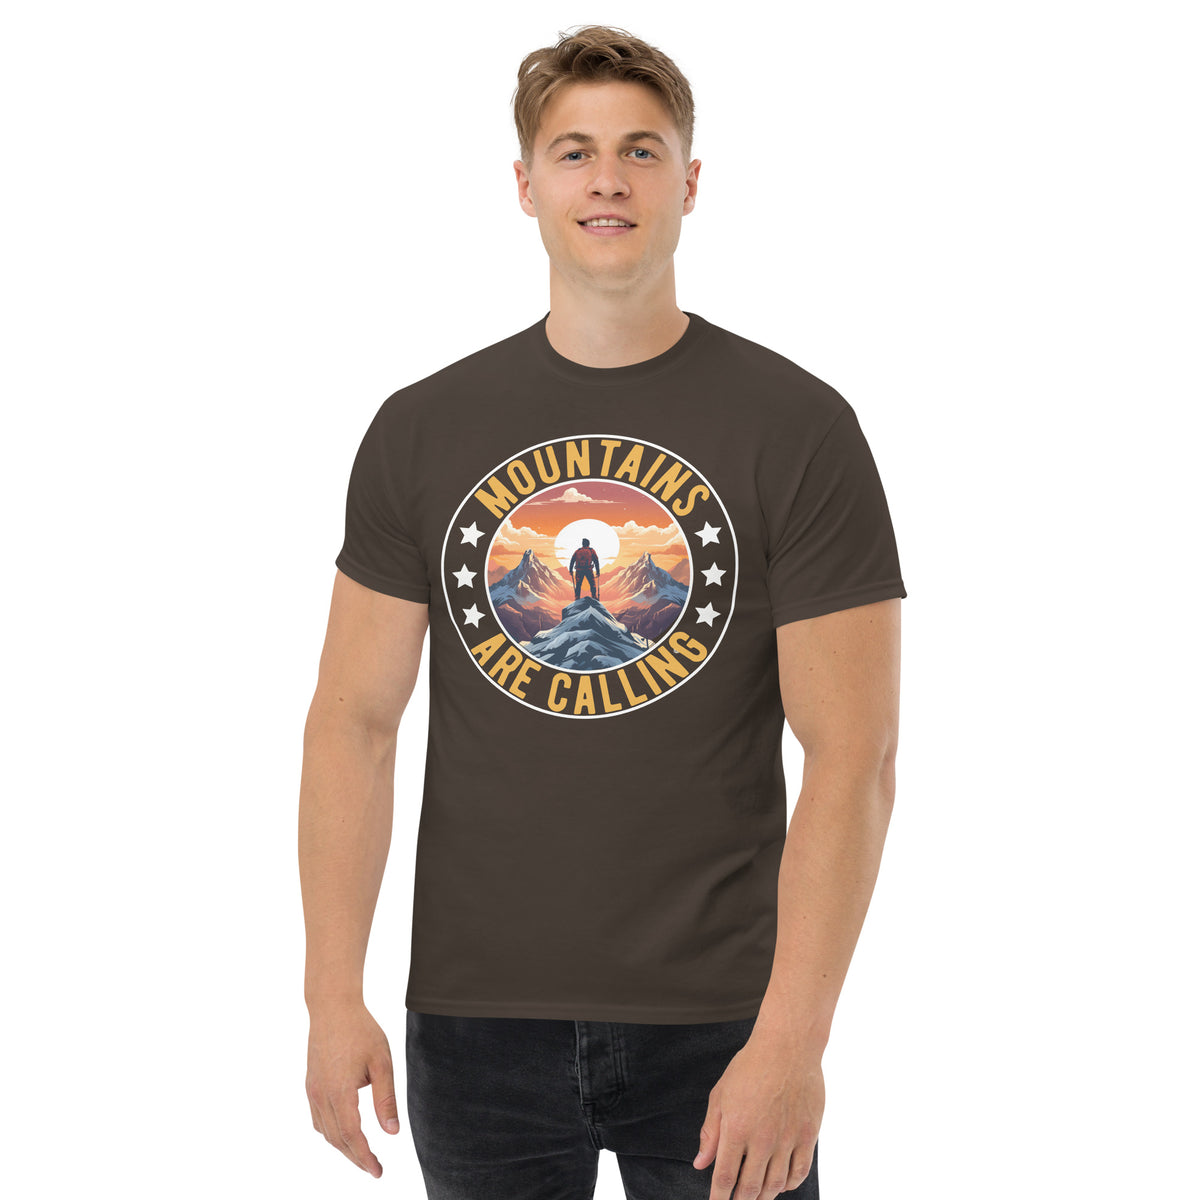 T-Shirt Outdoor & Wandern "Mountains are calling " Variante 3